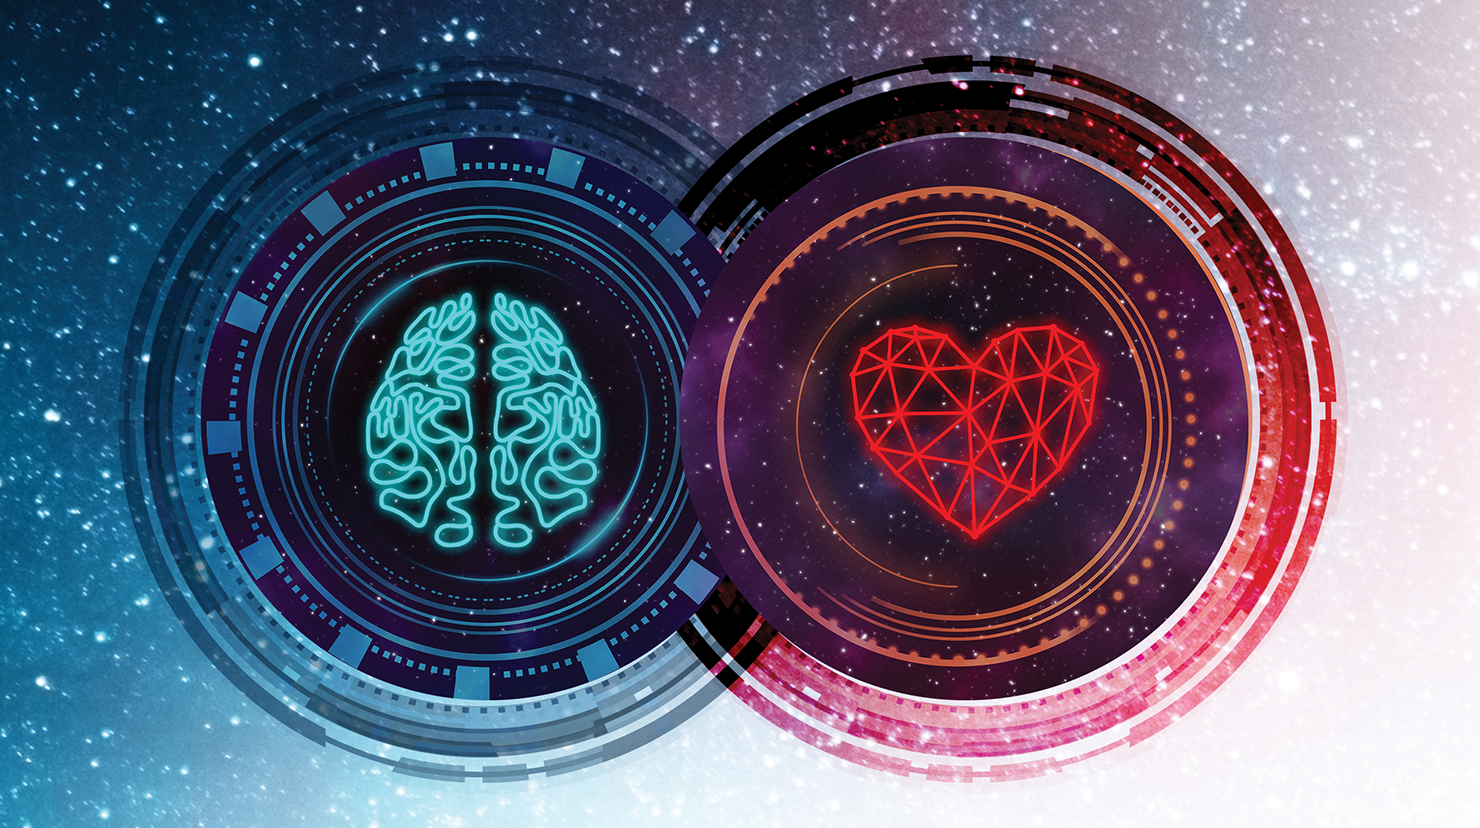 Conceptual image showing a brain and a heart next to each other 